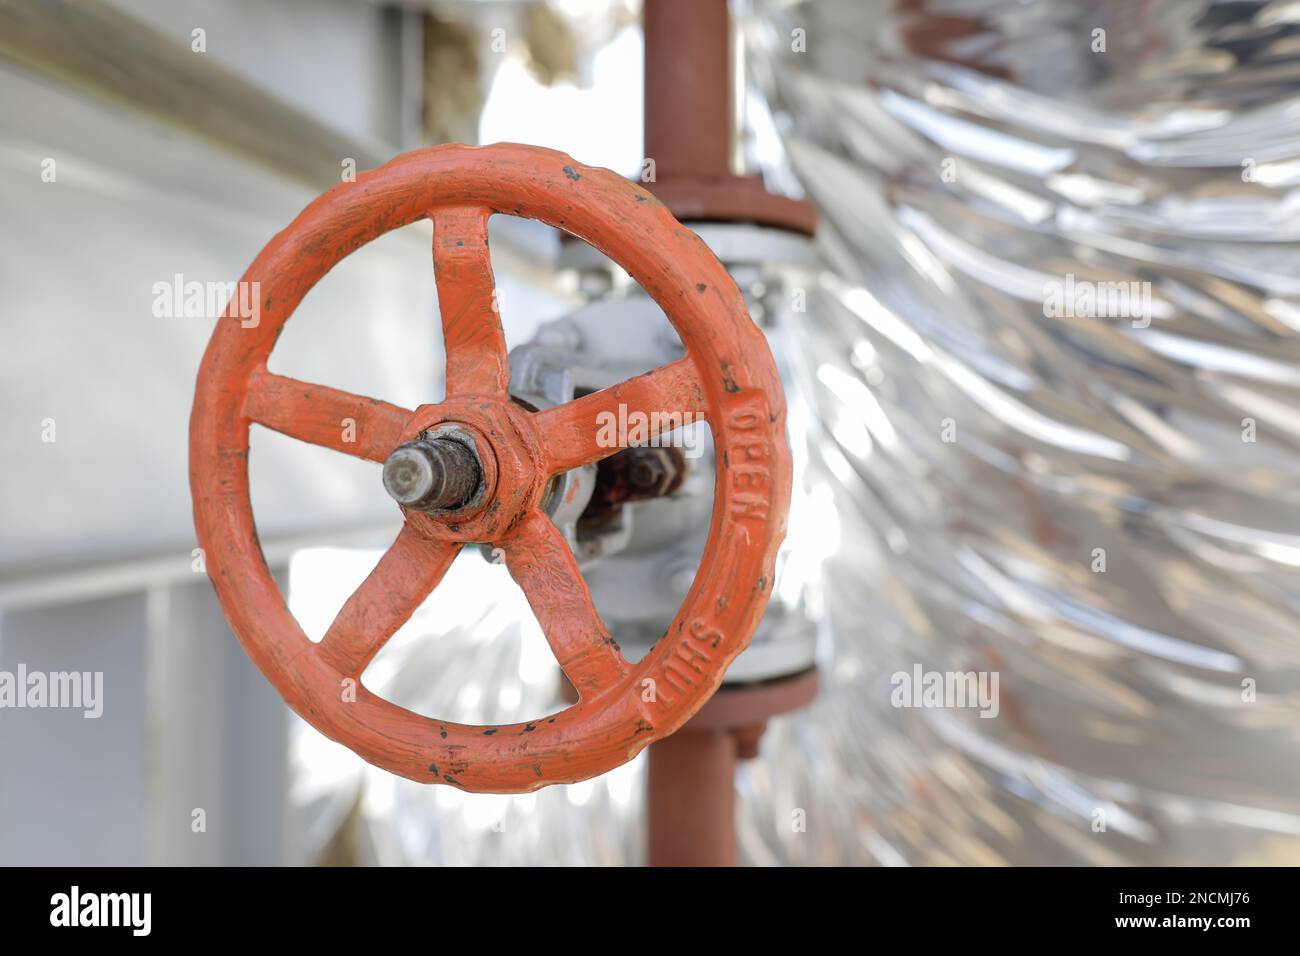 Shallow depth of field details with a metallic pipe valve used to open or close the hot water debit inside a big pipeline. Stock Photo